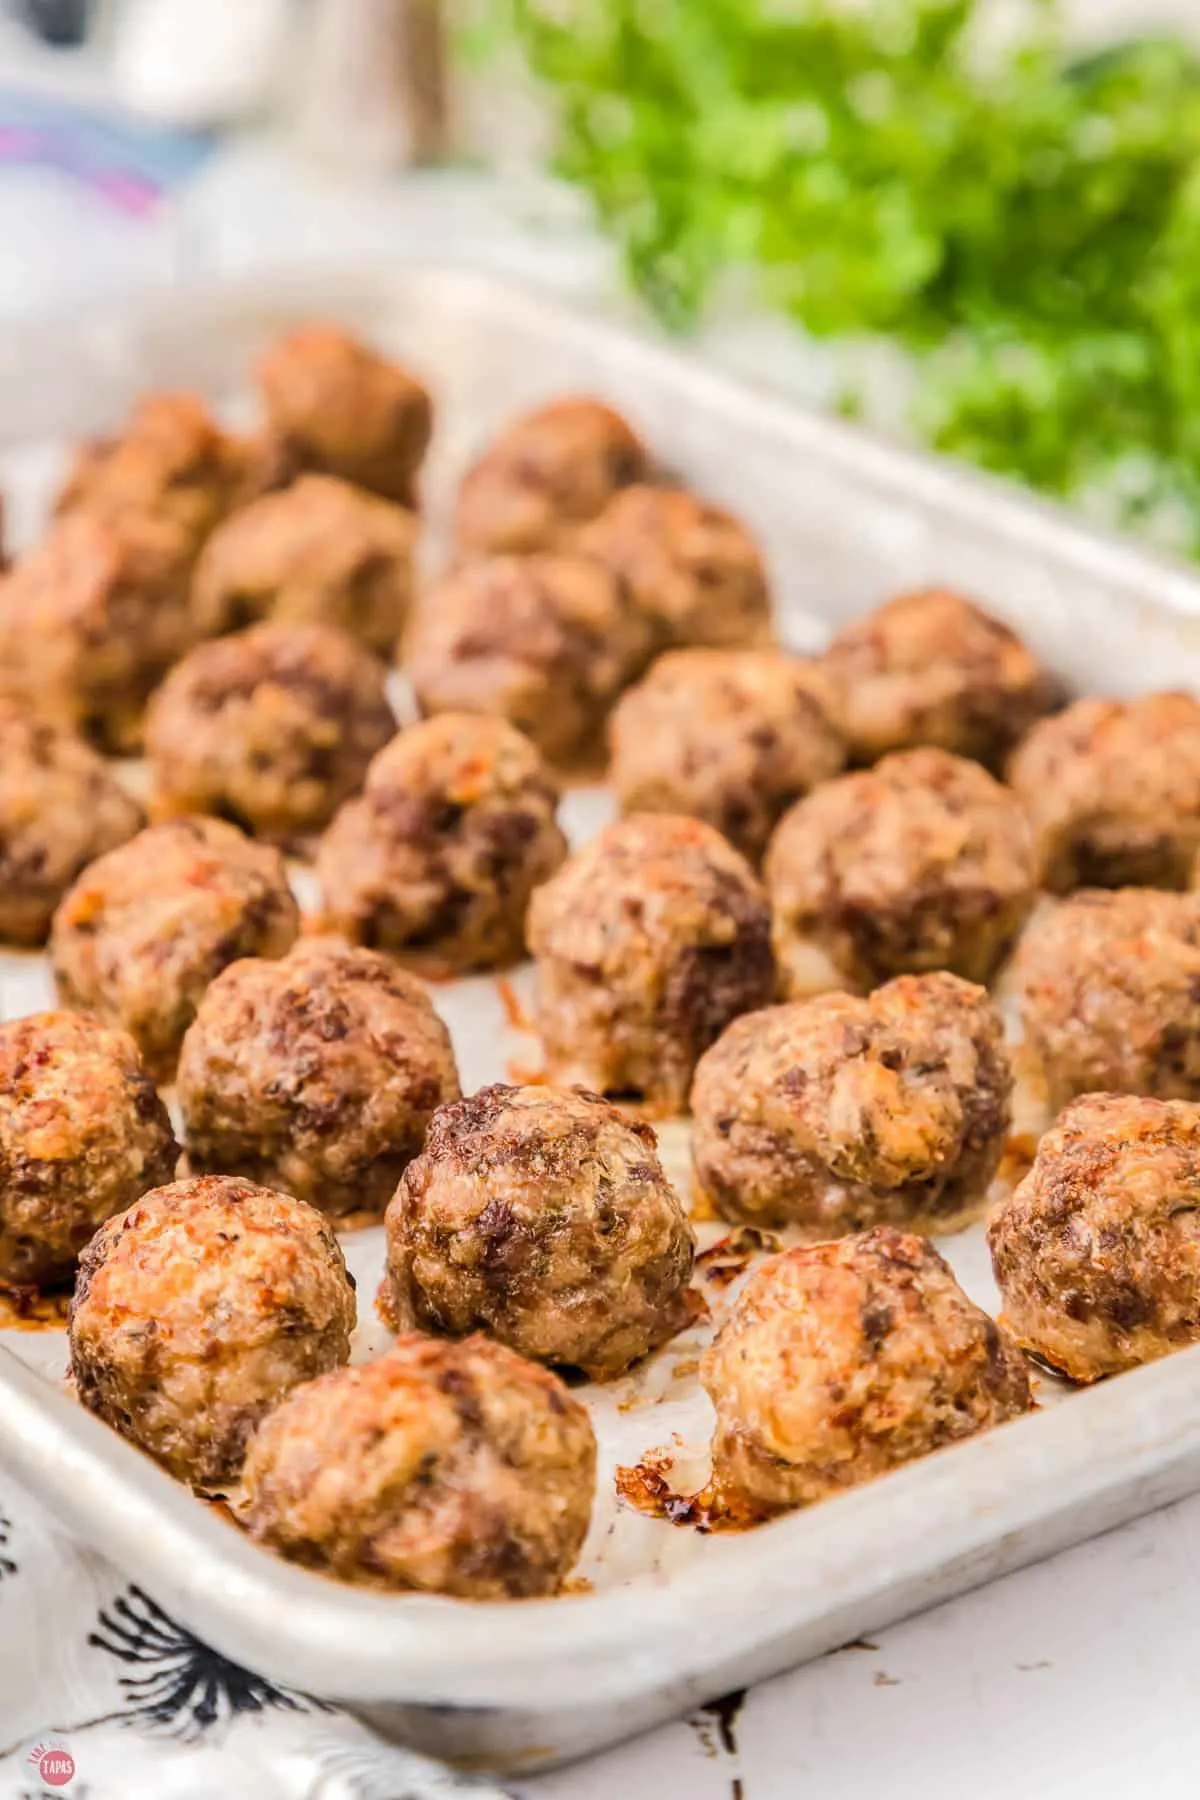 frozen meatballs are great option for meal prep